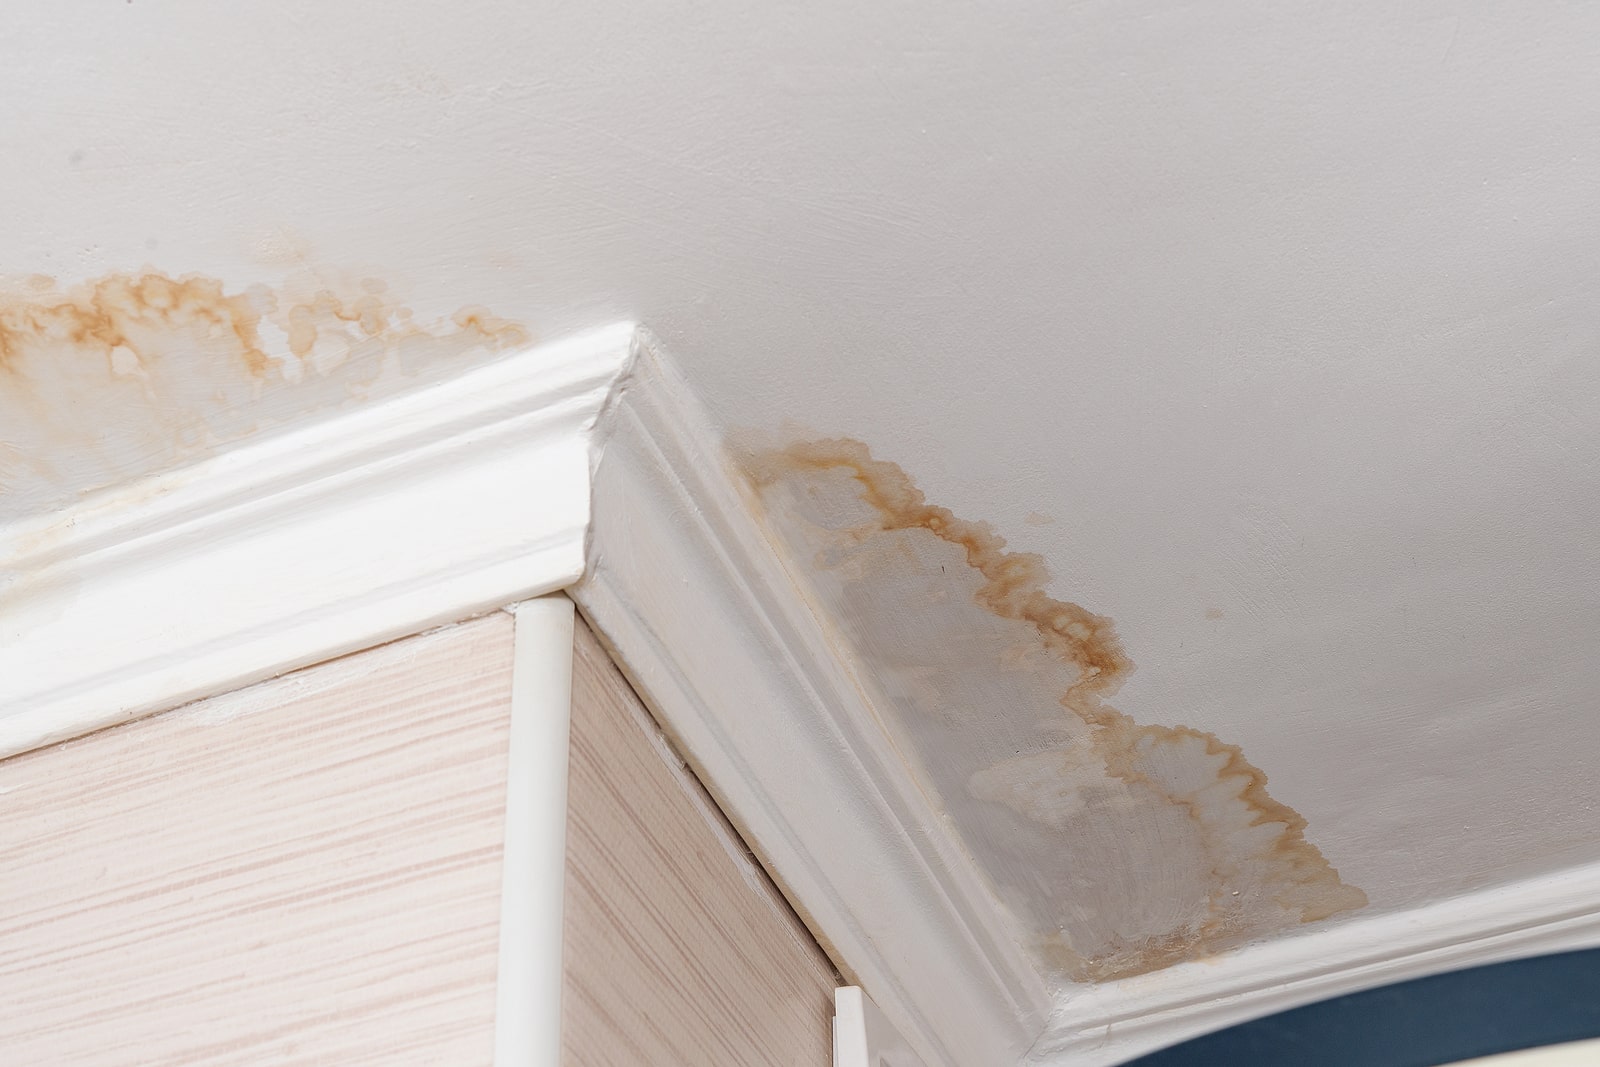 How To Fix A Ceiling Leak: A Step-by-step Guide